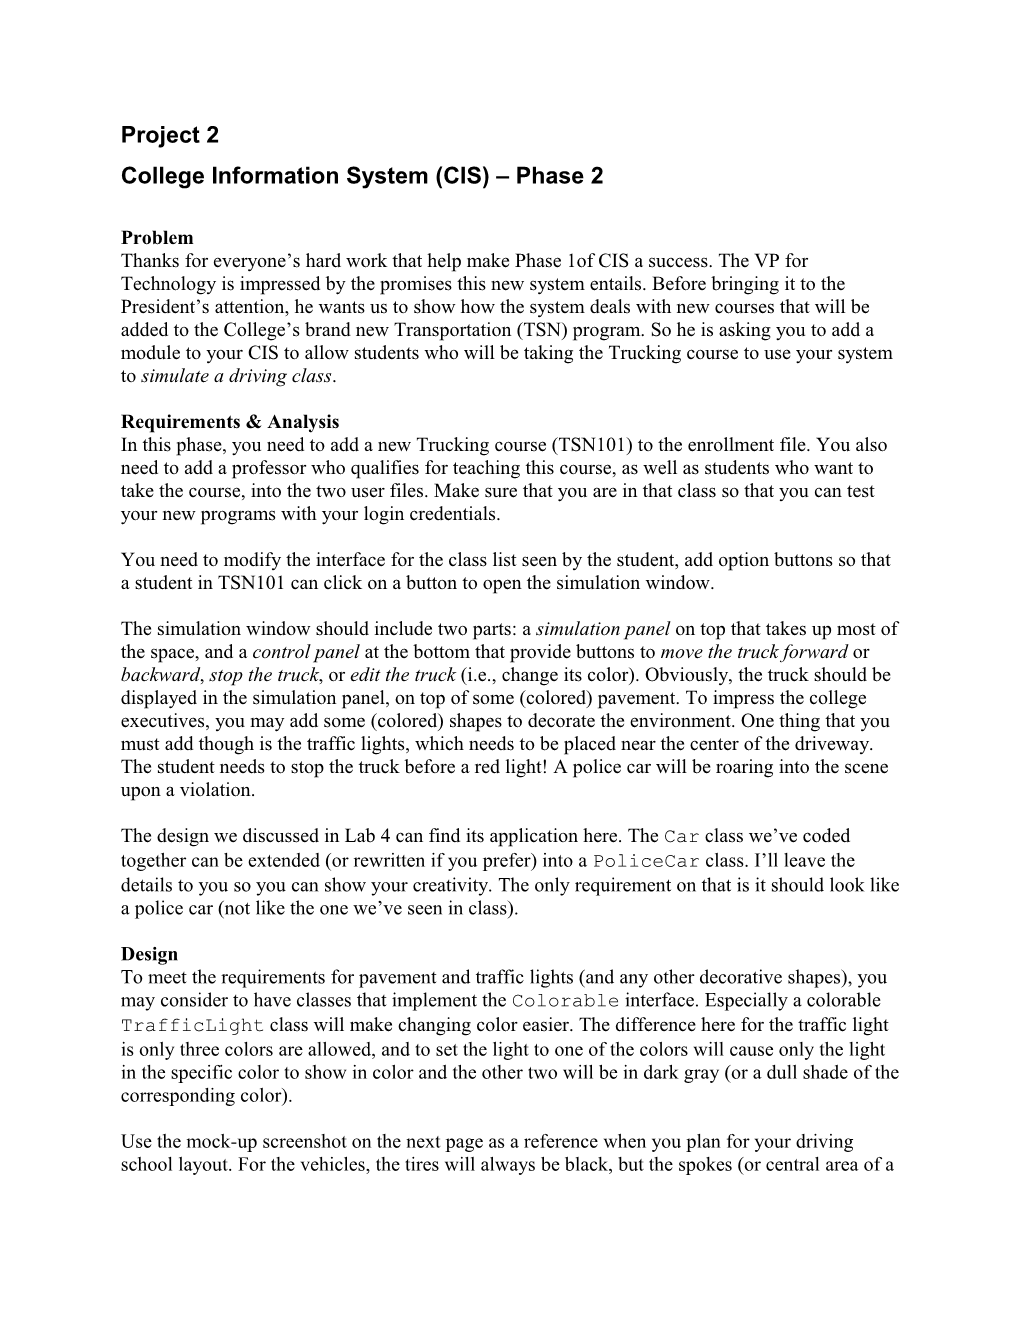 College Information System (CIS) Phase 2